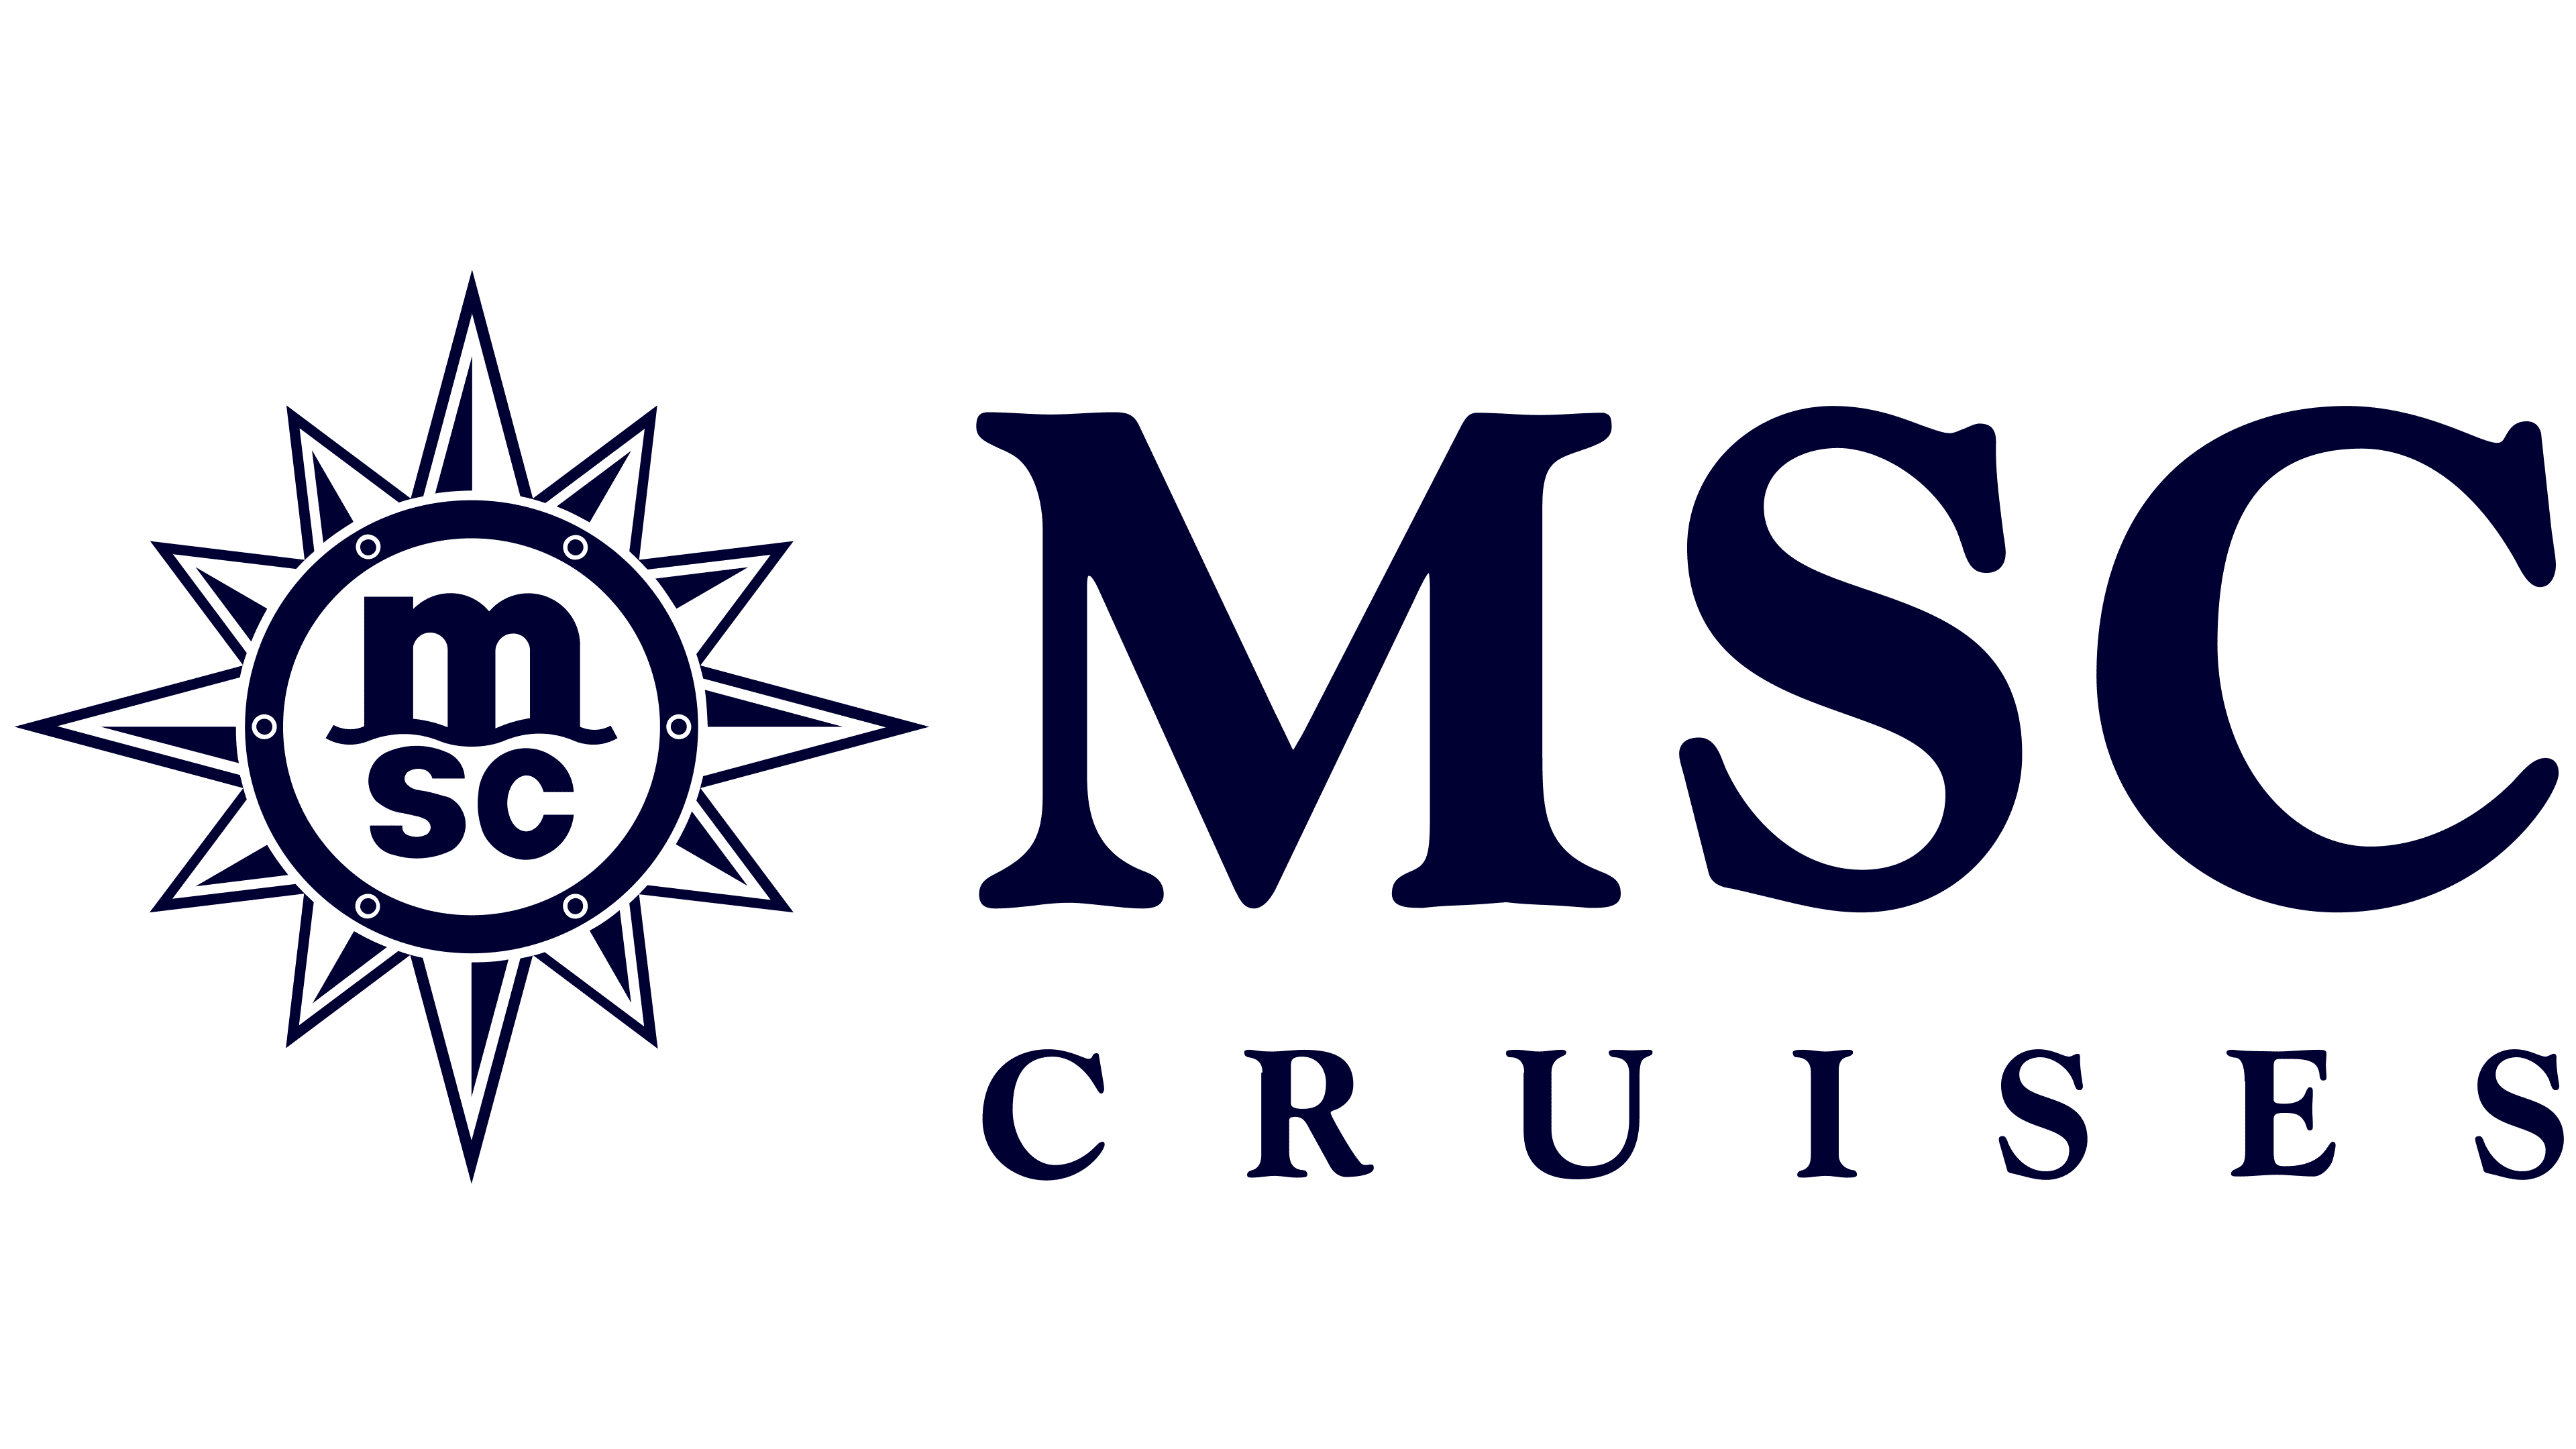 cruise lines or companies